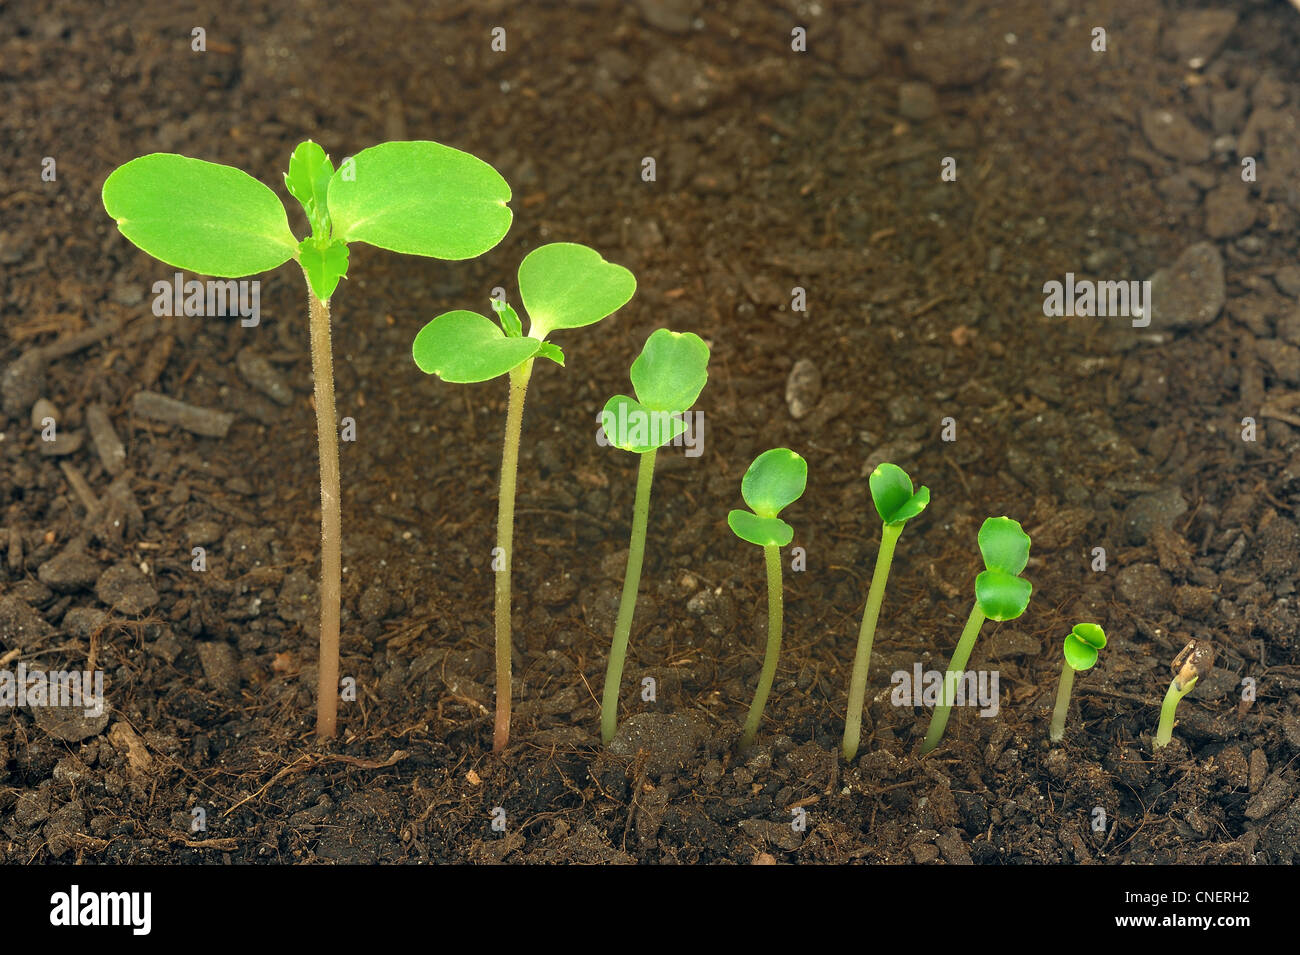 Sequence of Impatiens balsamina flower growing, evolution concept Stock Photo